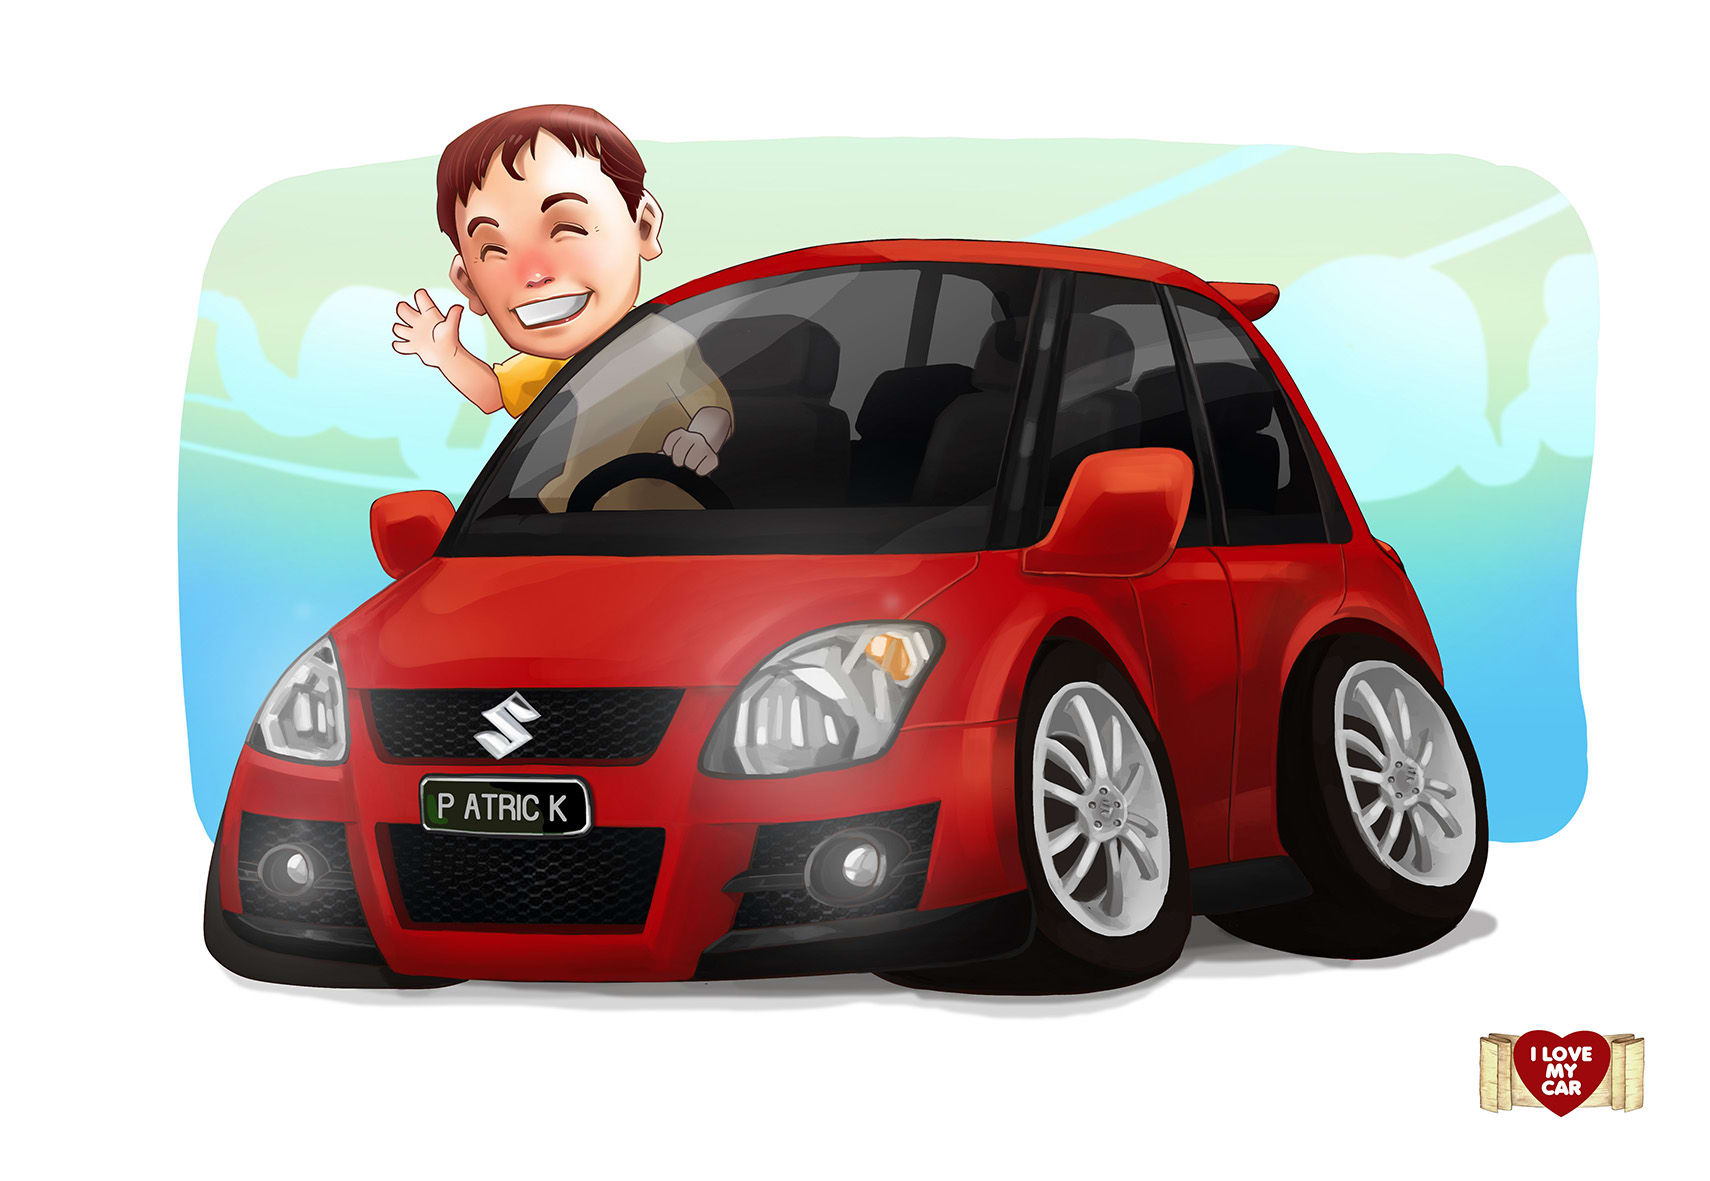 Draw your car into cartoon style by Signdesigncomm | Fiverr